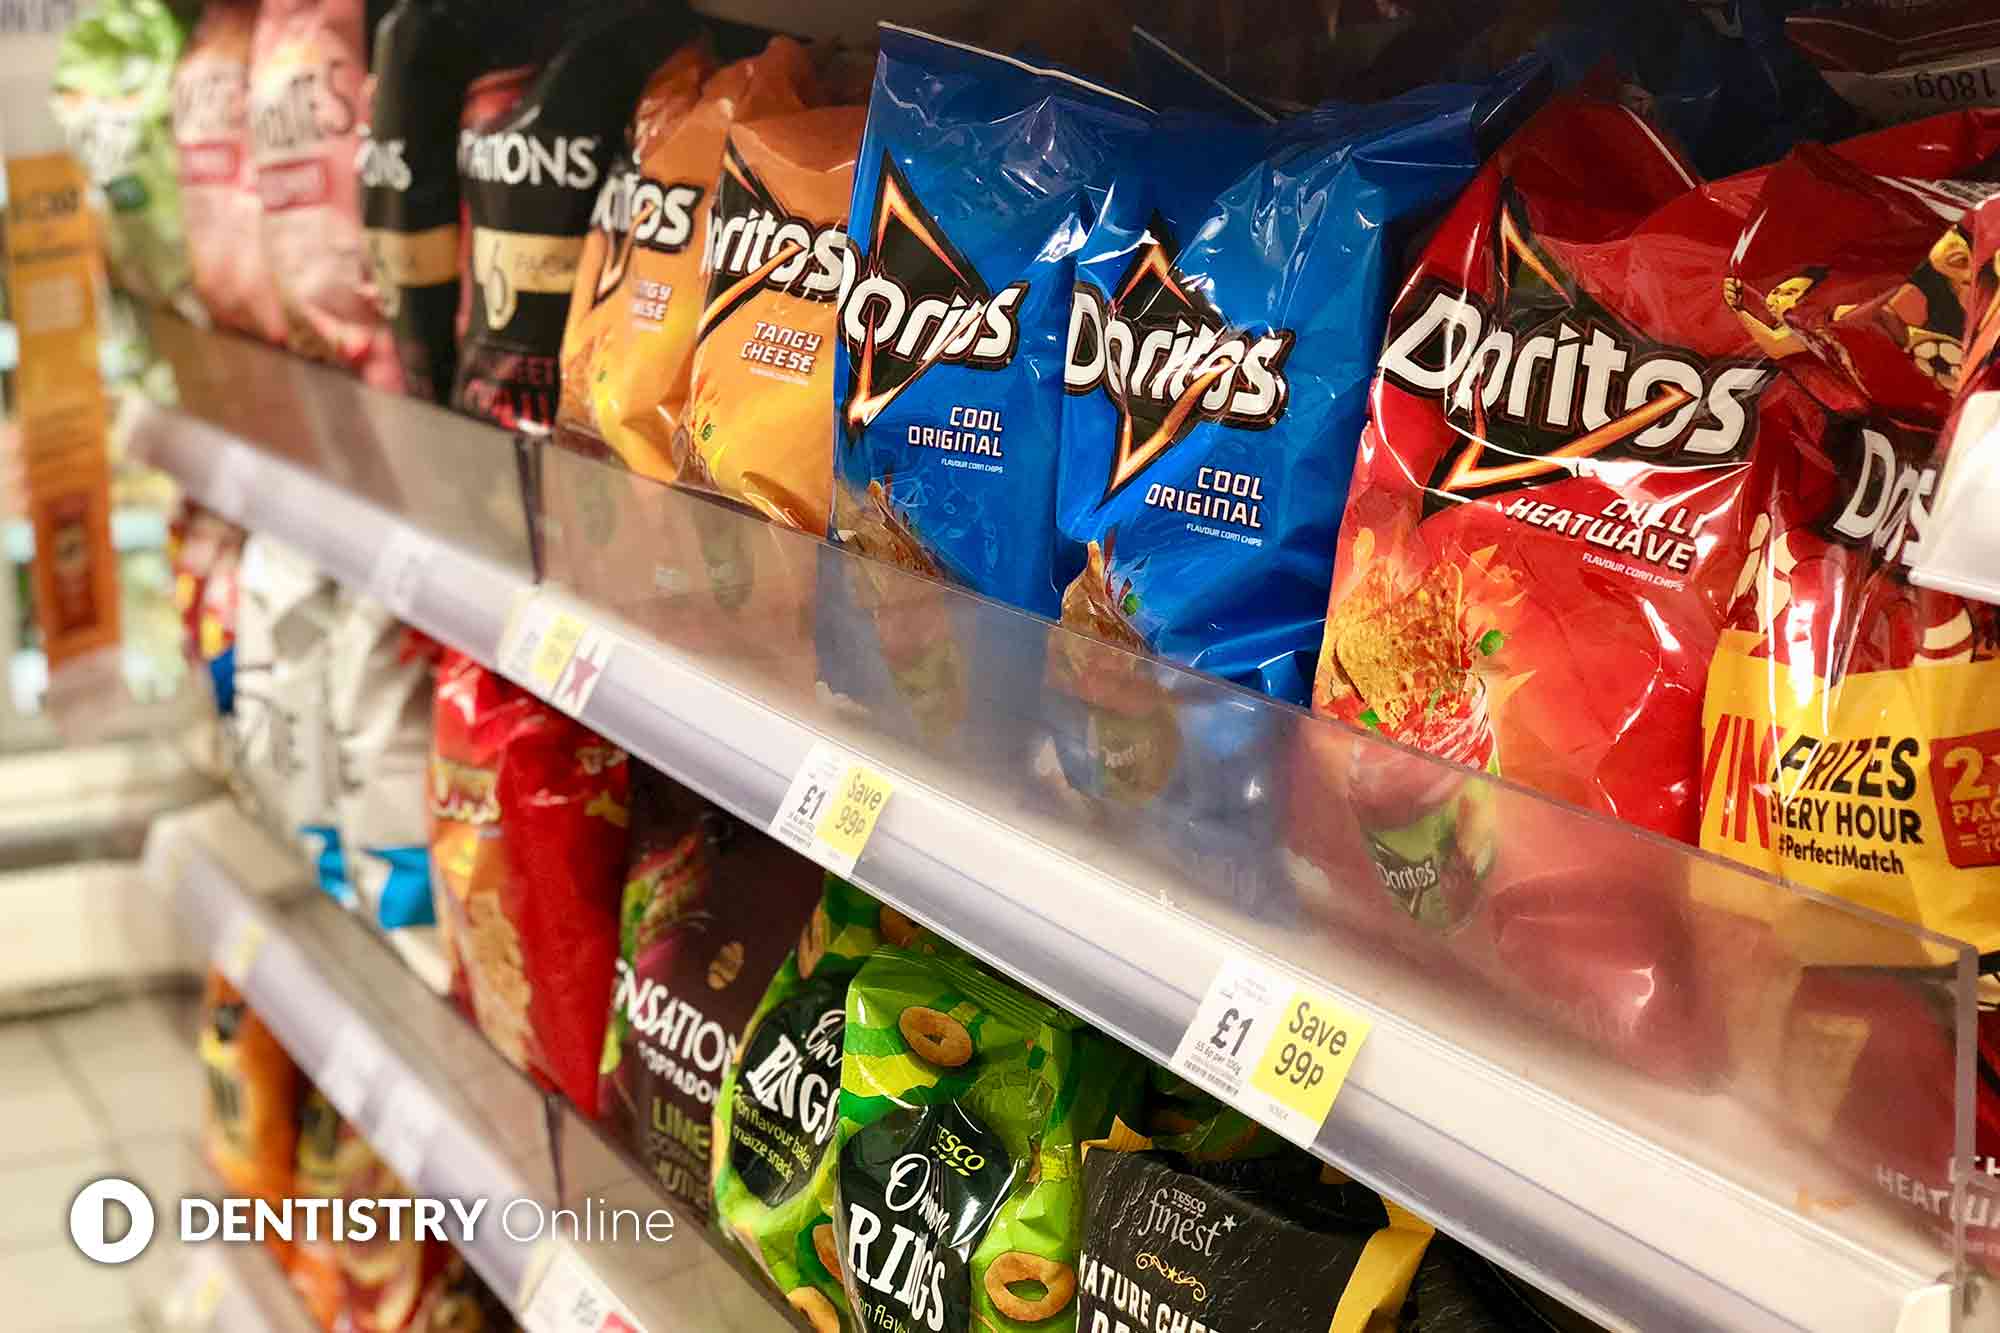 'Buy one get one free' promotions on unhealthy snacks will be cut back in supermarkets